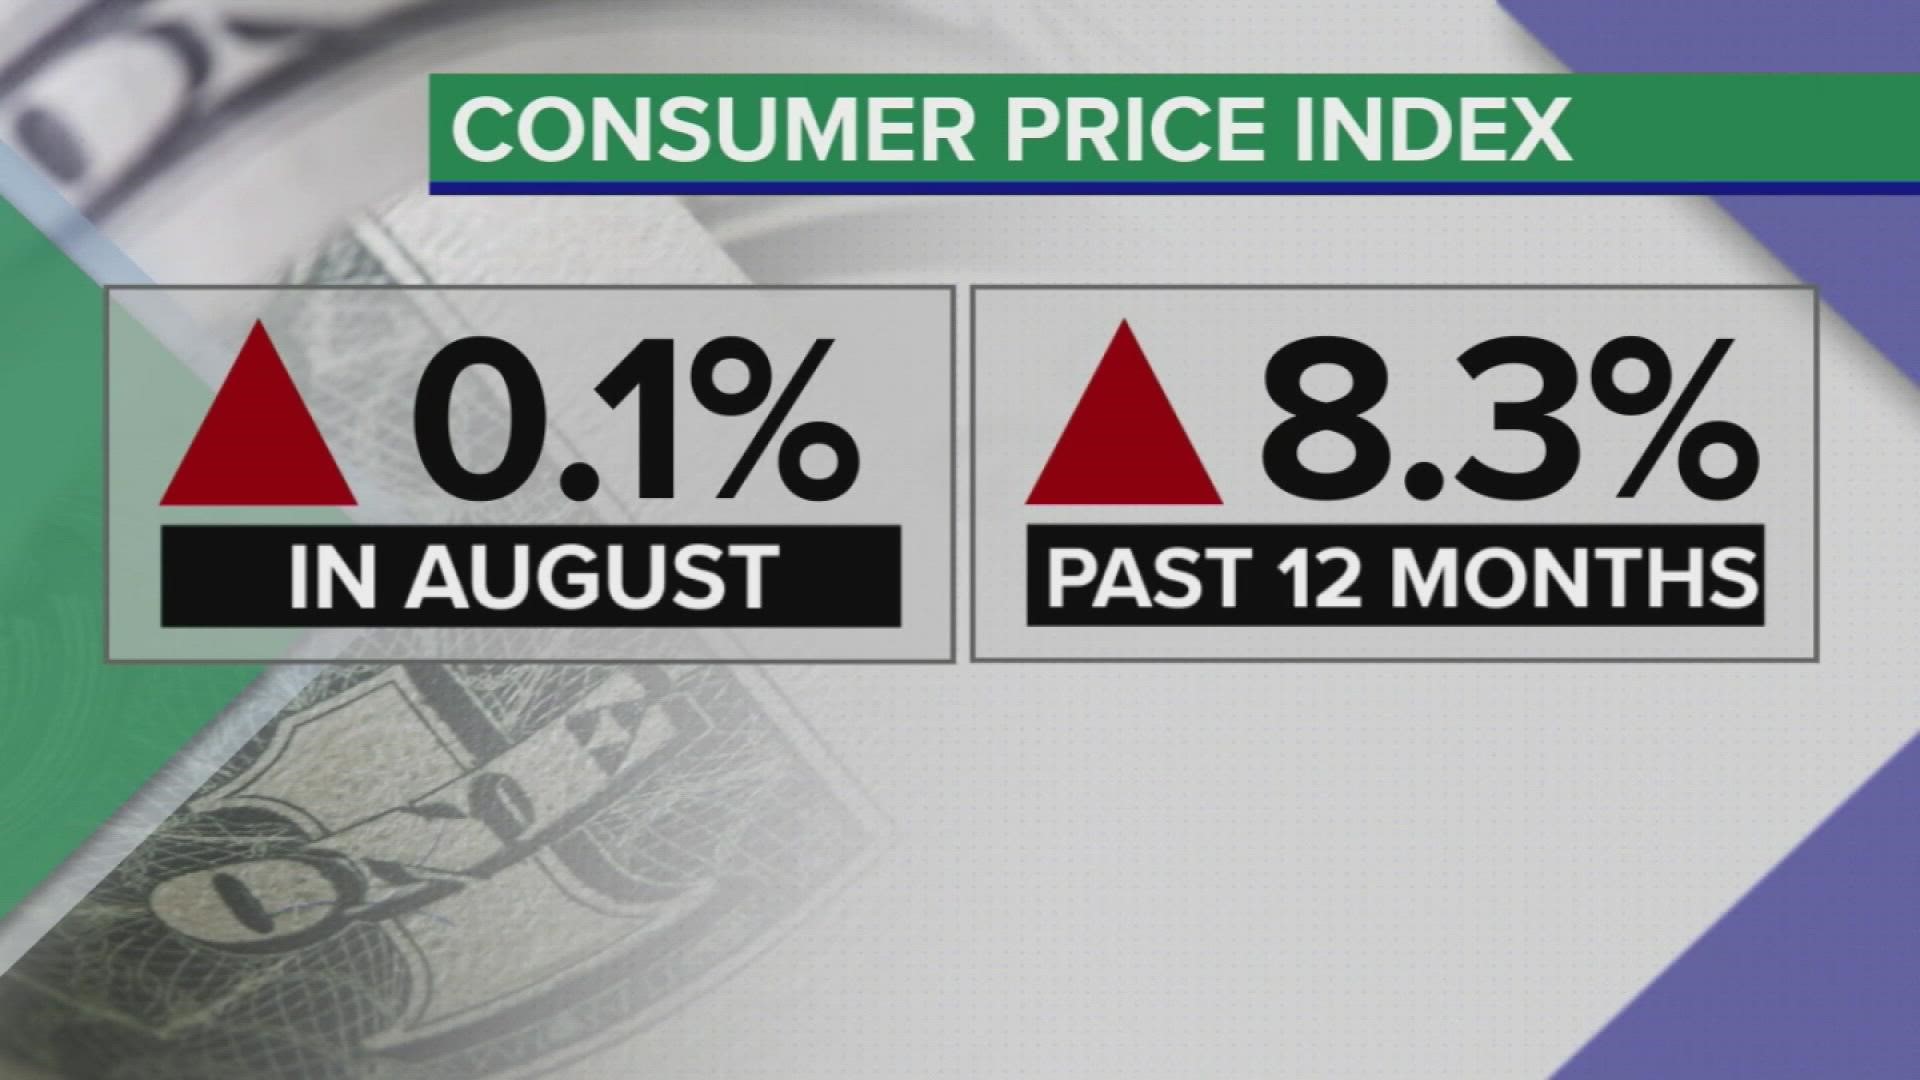 Sharply lower prices for gas and cheaper used cars slowed inflation, but many other items rose in price.